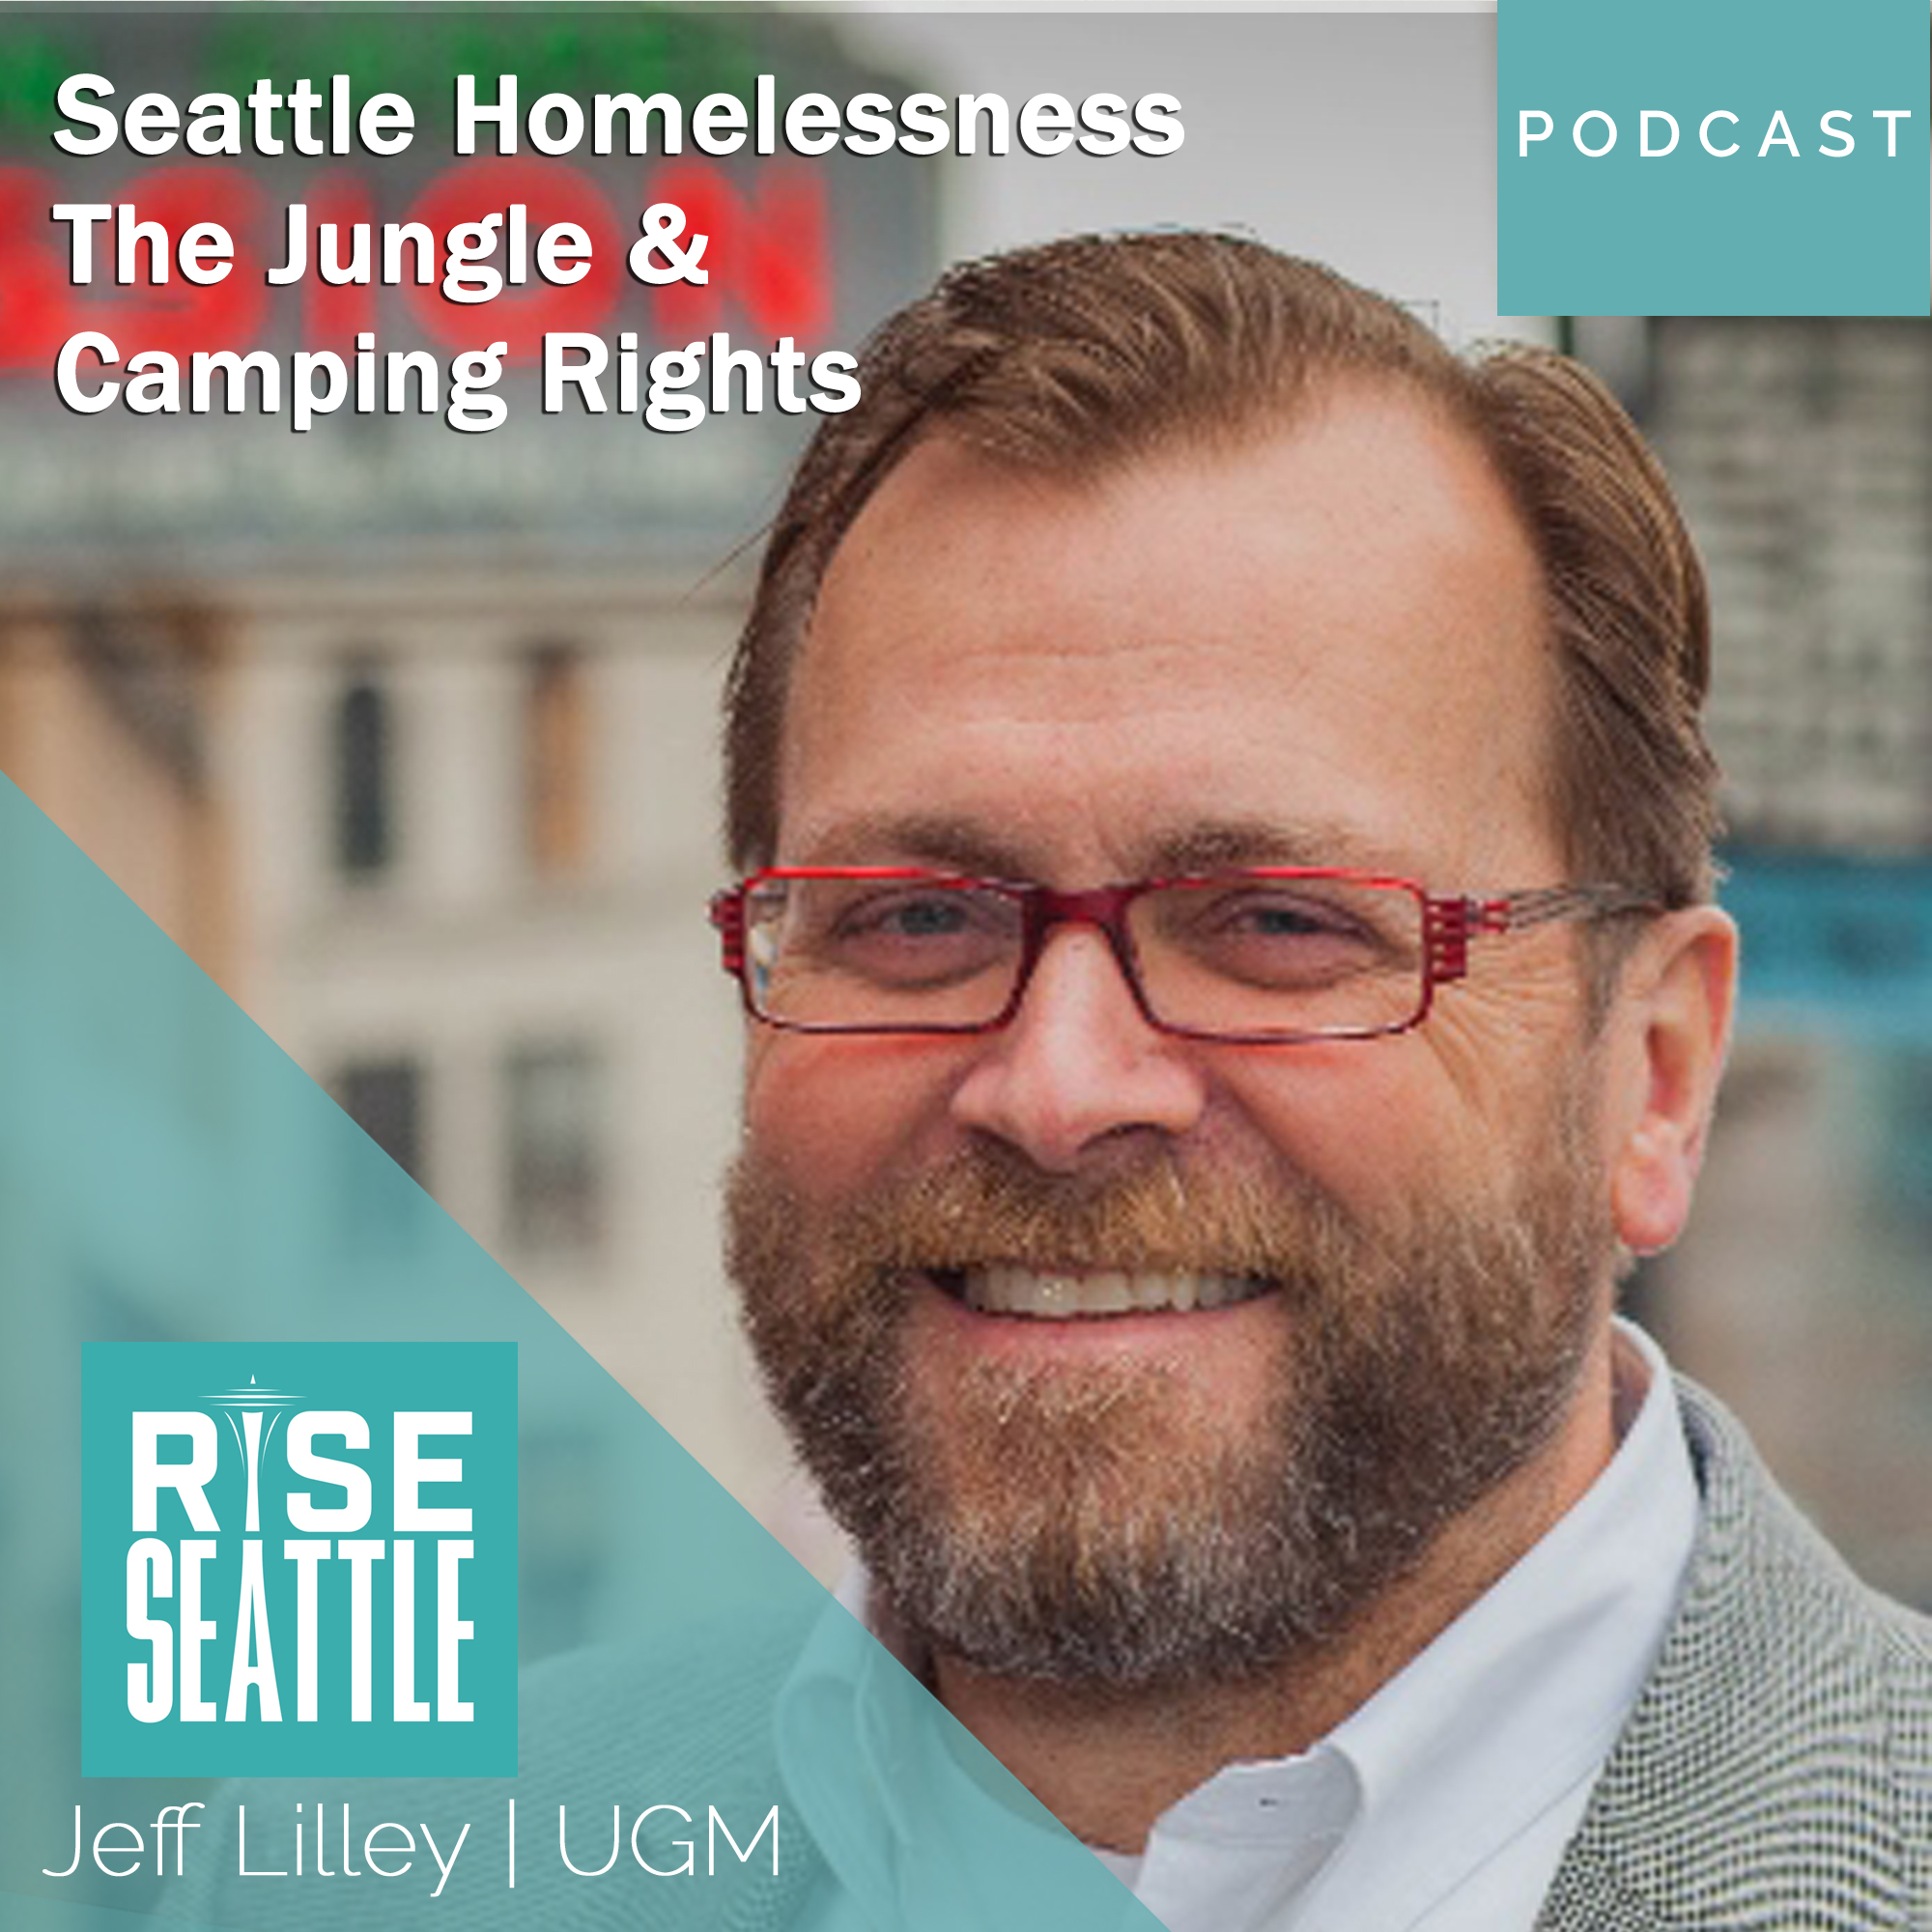 S1.E7. Jeff Lilley: Seattle Homelessness, Clearing "the Jungle" & Camping Rights